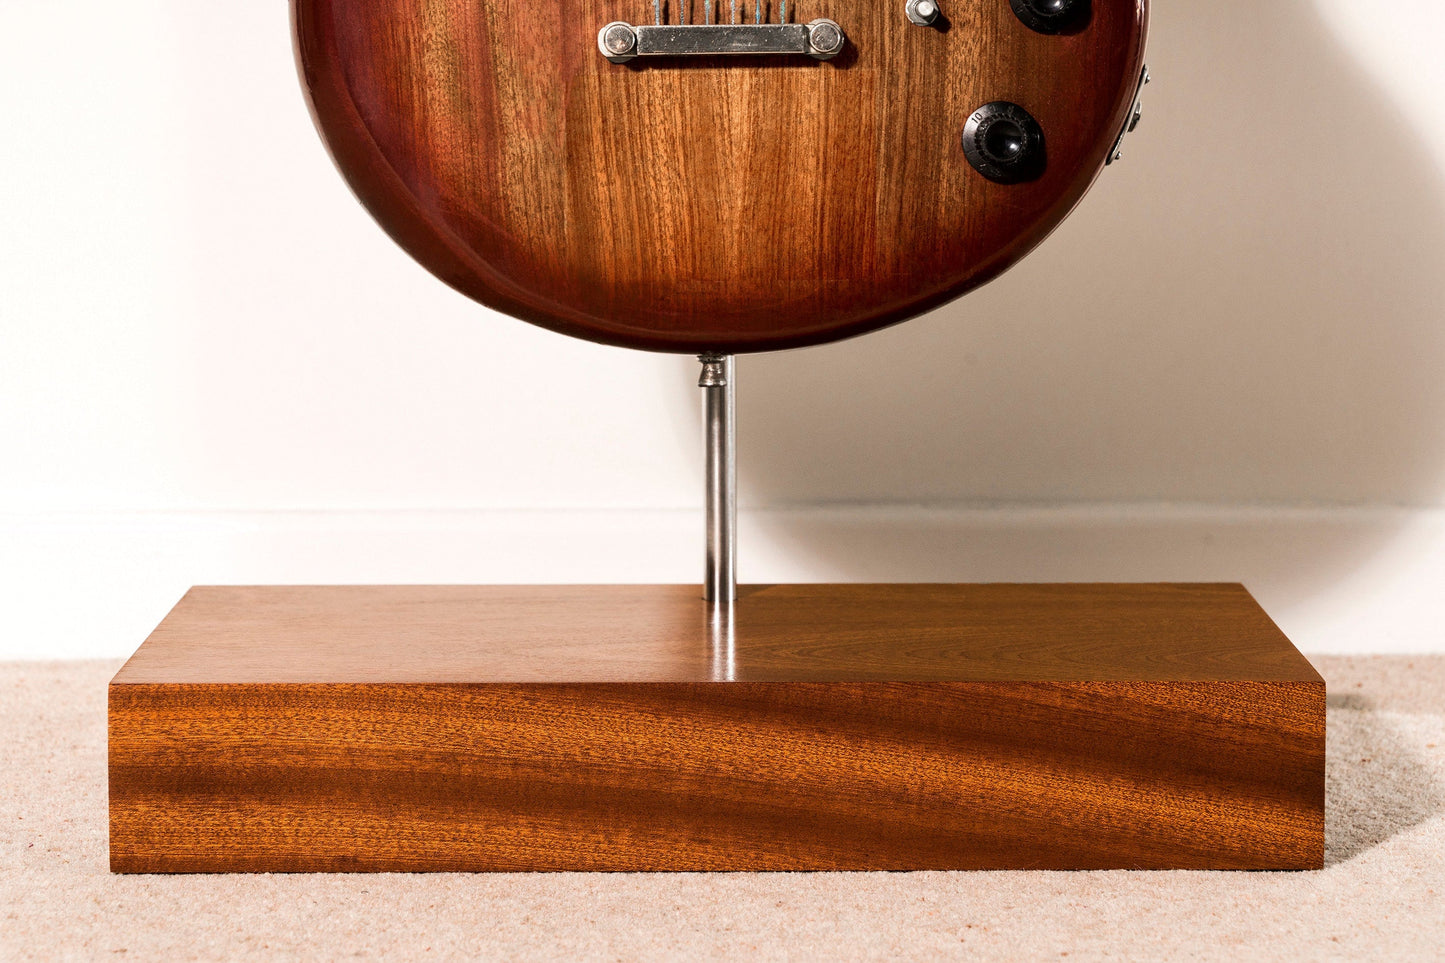 Mahogany Guitar stand - Cubic - by M-ski